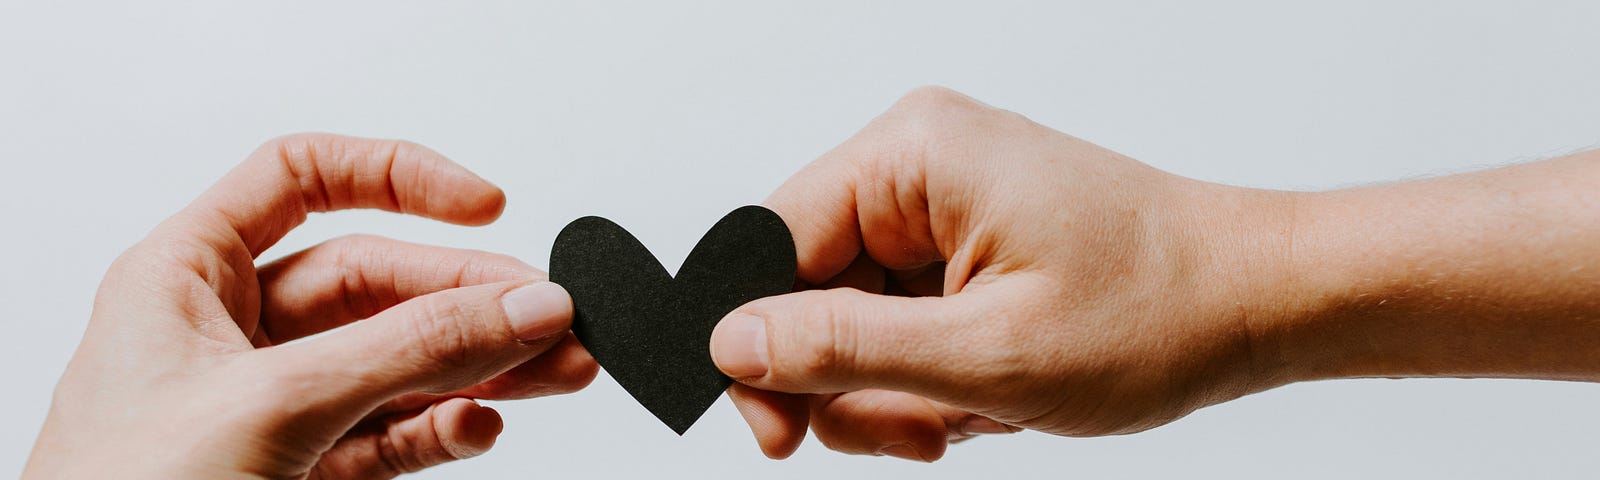 A person’s hand offering a heart to another person’s hand